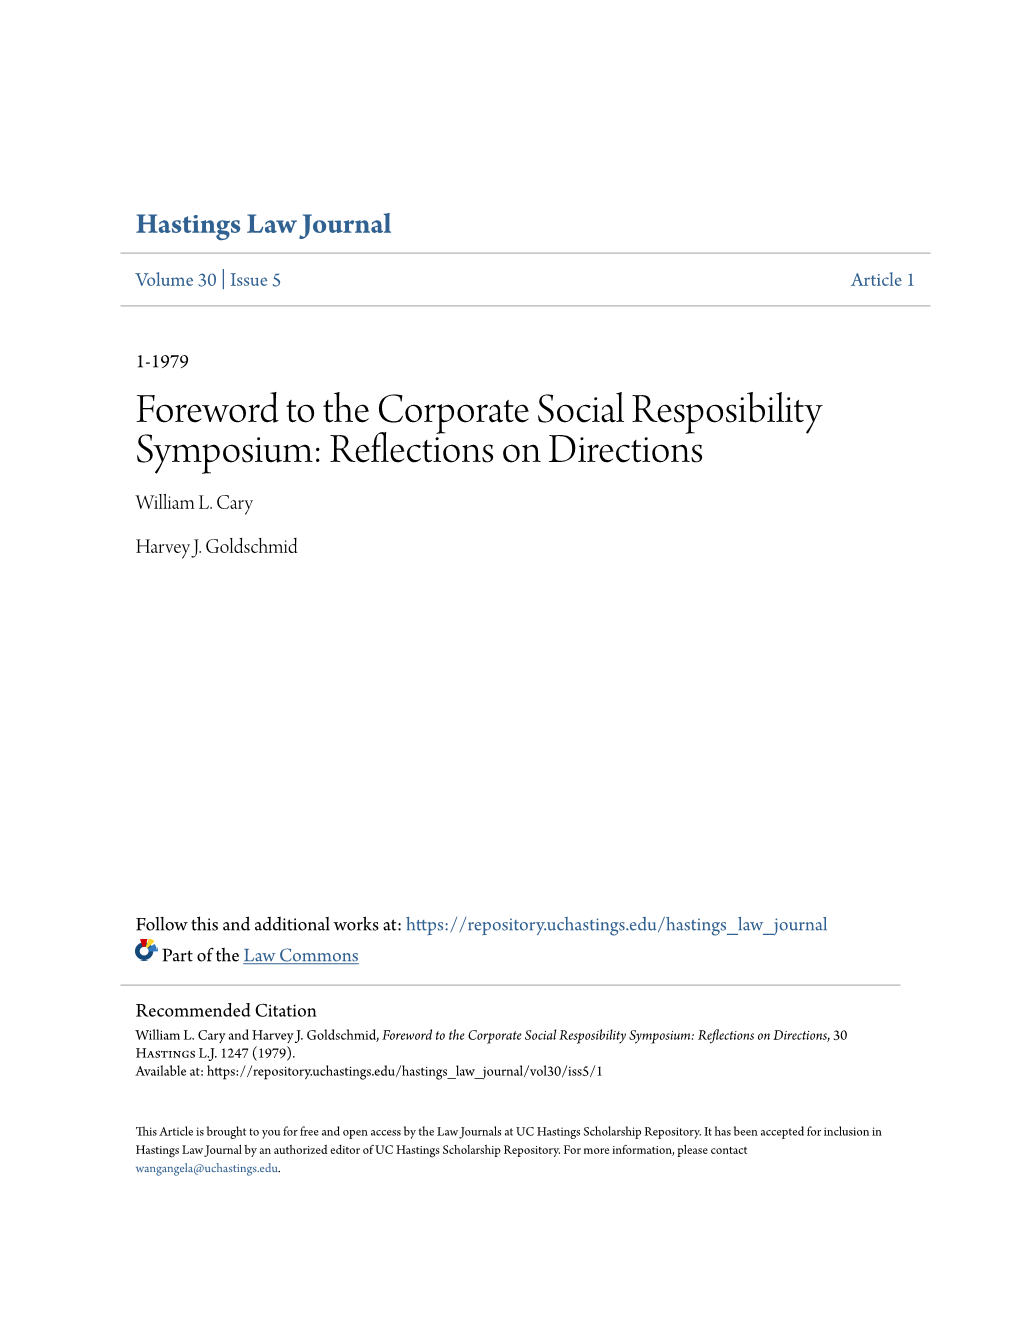 Foreword to the Corporate Social Resposibility Symposium: Reflections on Directions William L